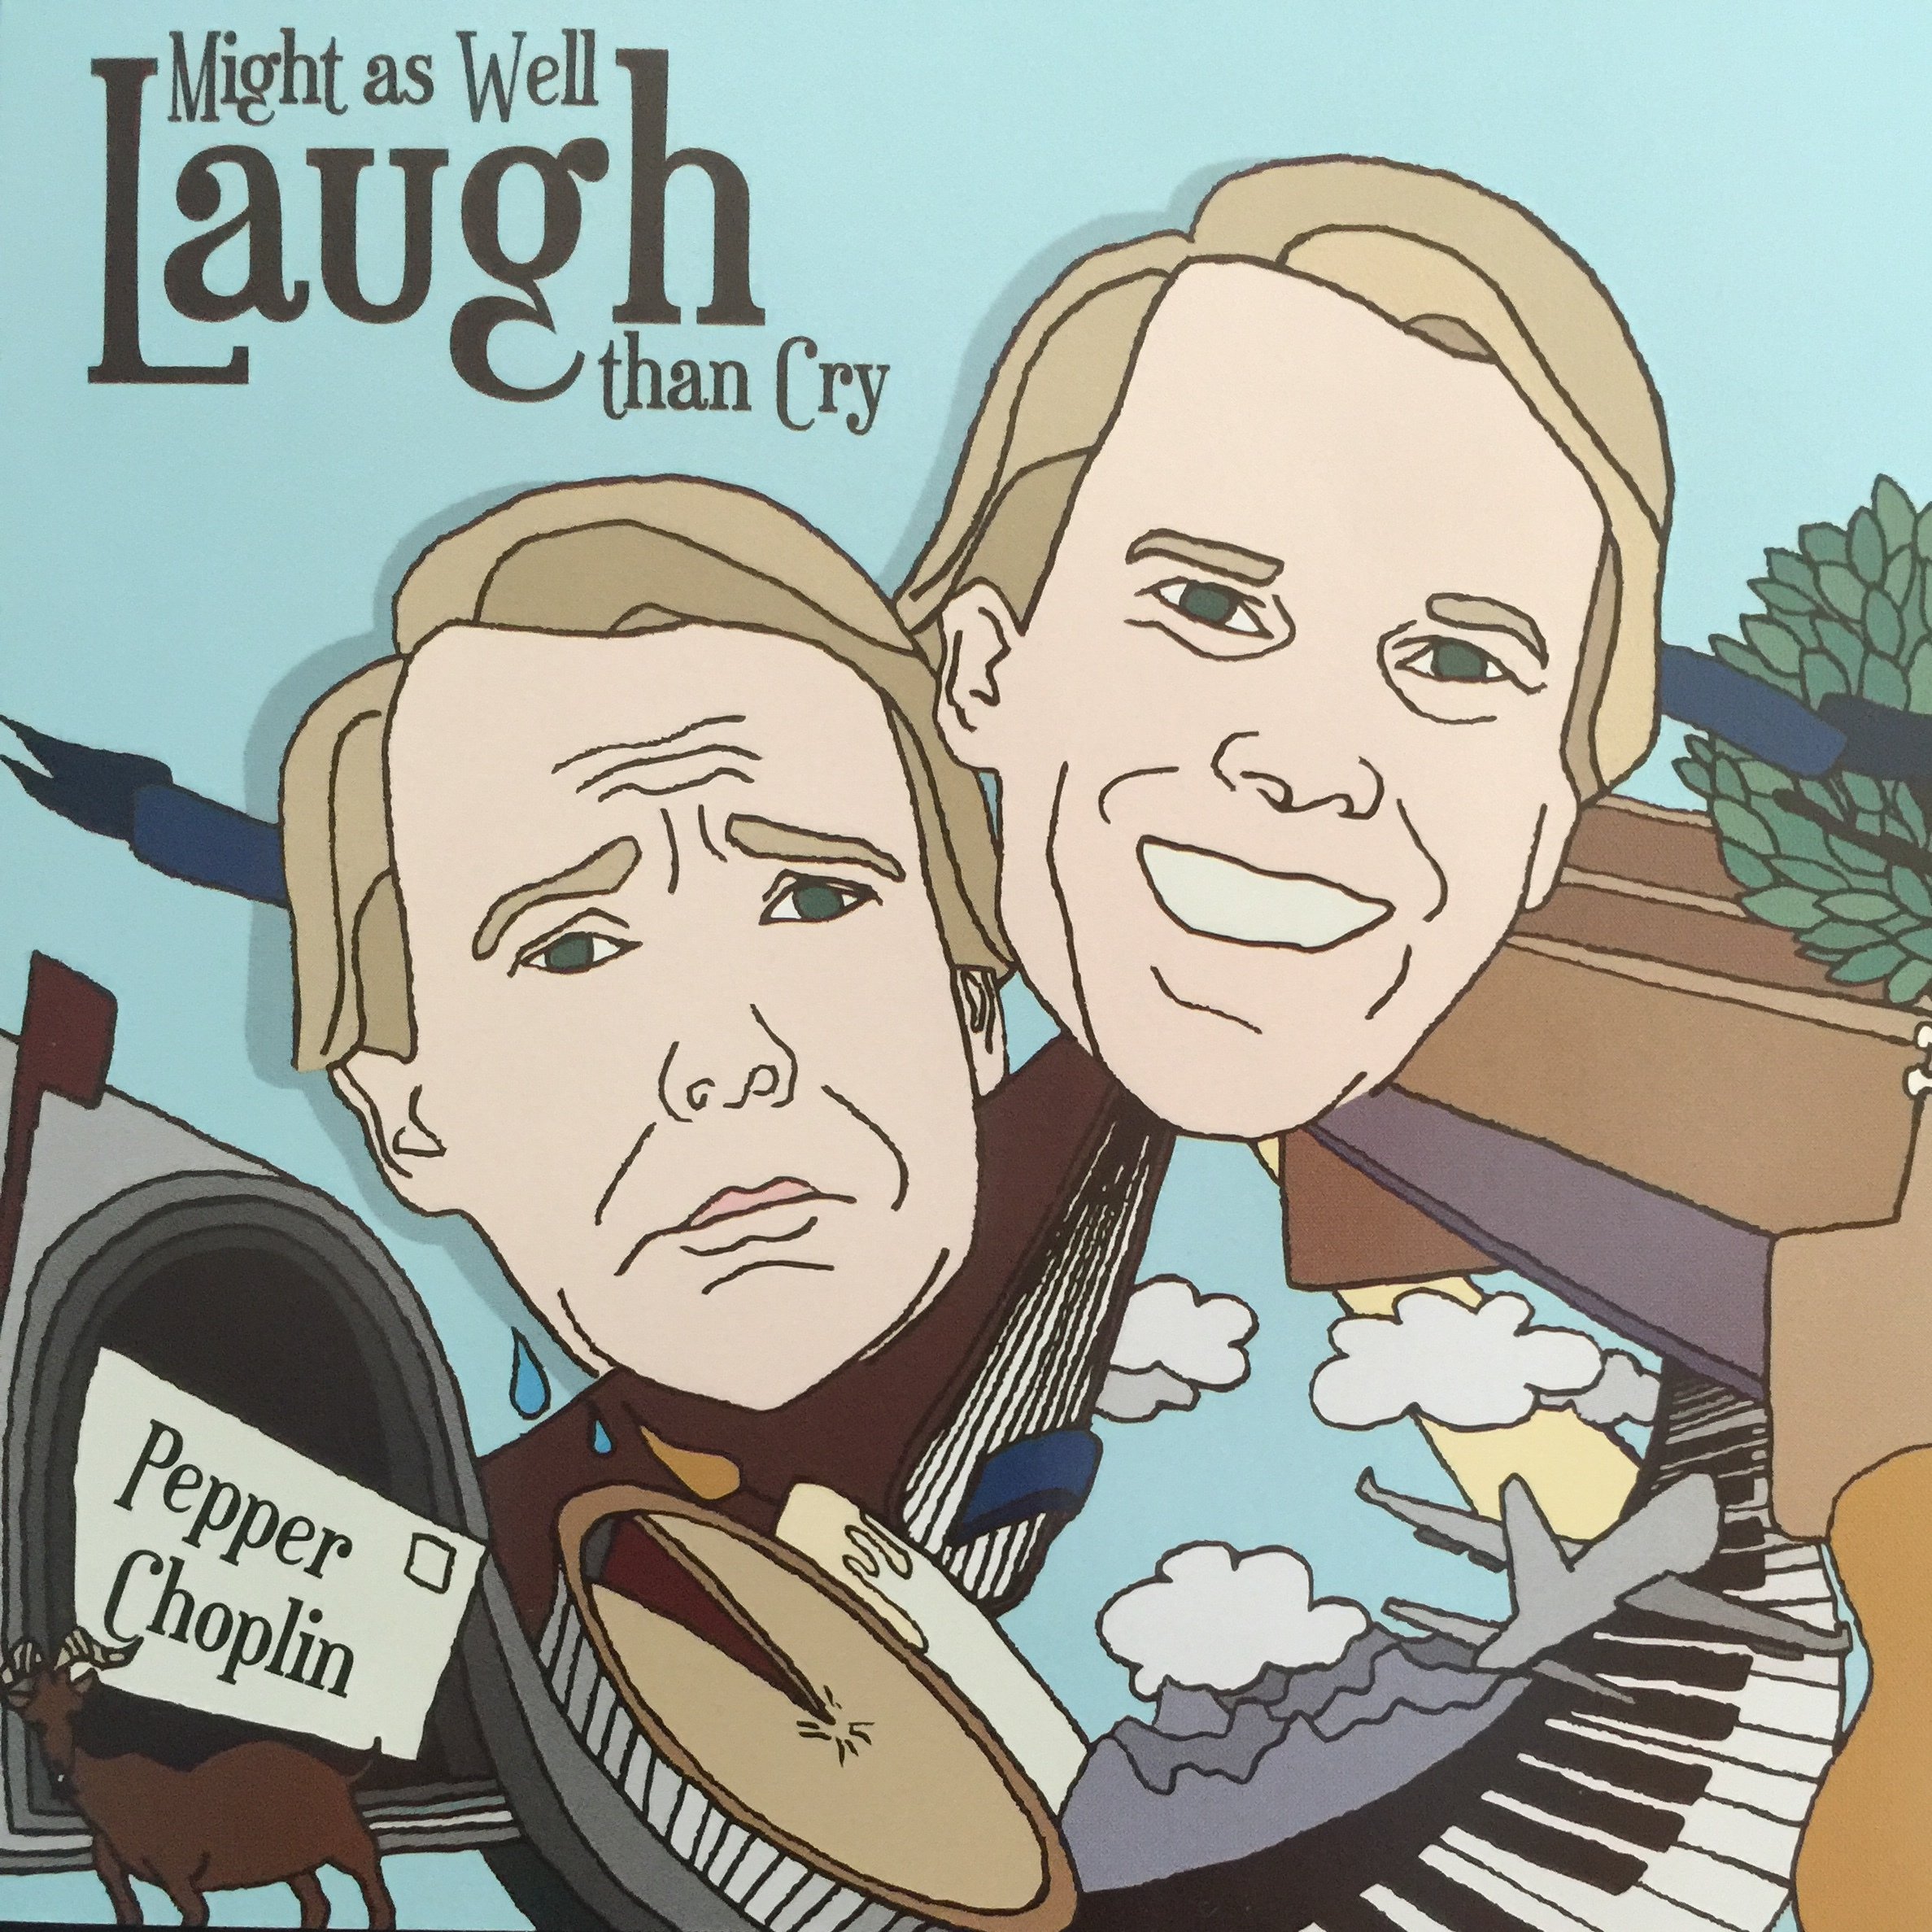 Might as Well Laugh CD pic.JPG